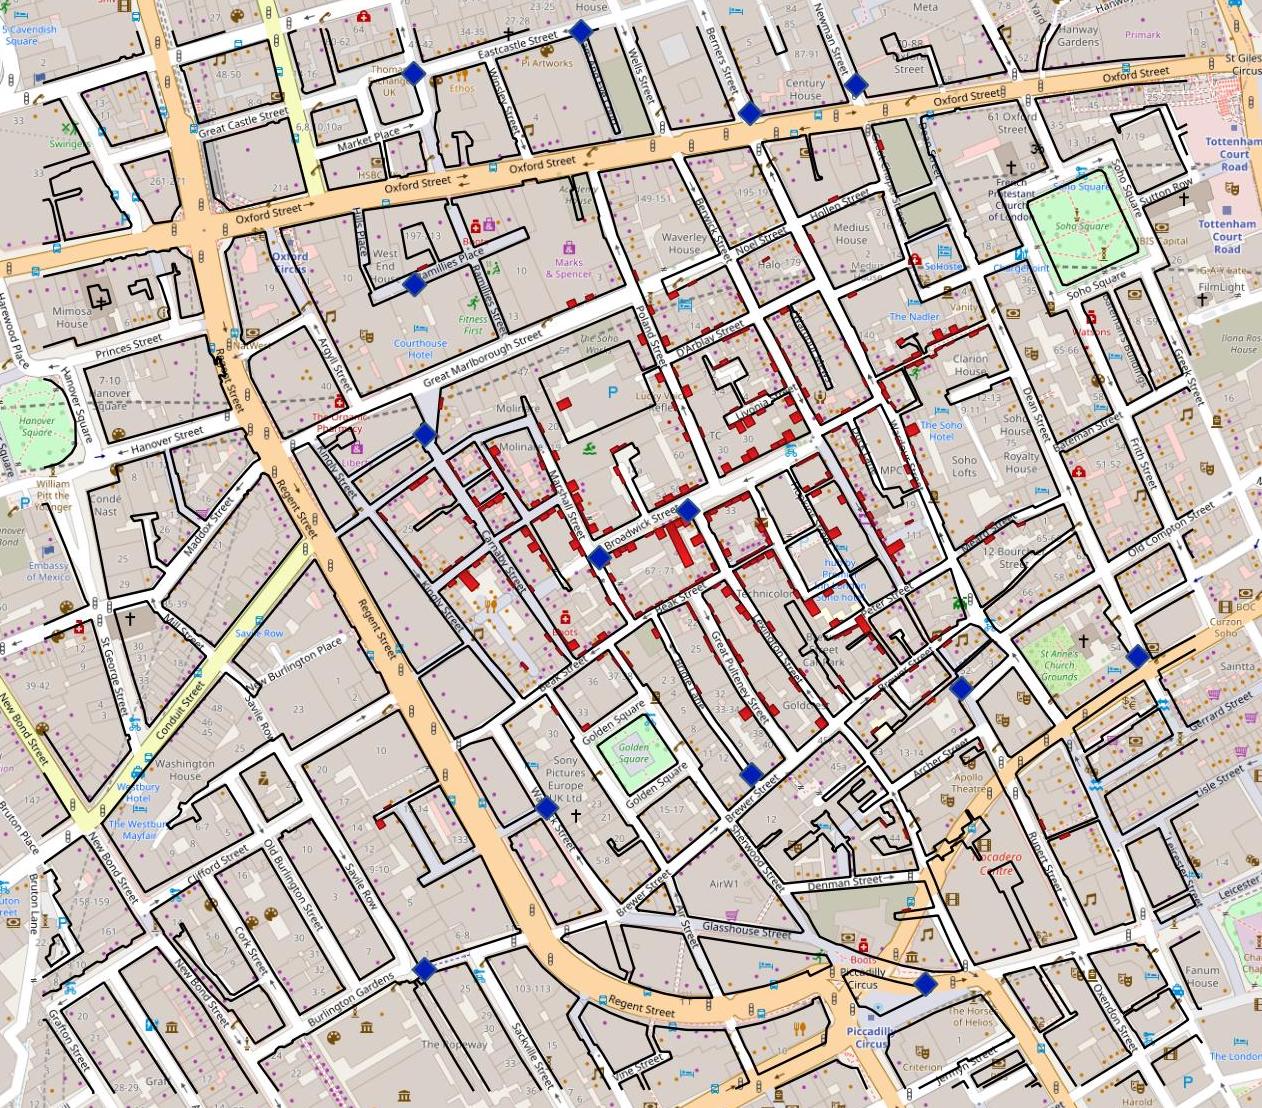 Ghost map streets, PDF was digitized